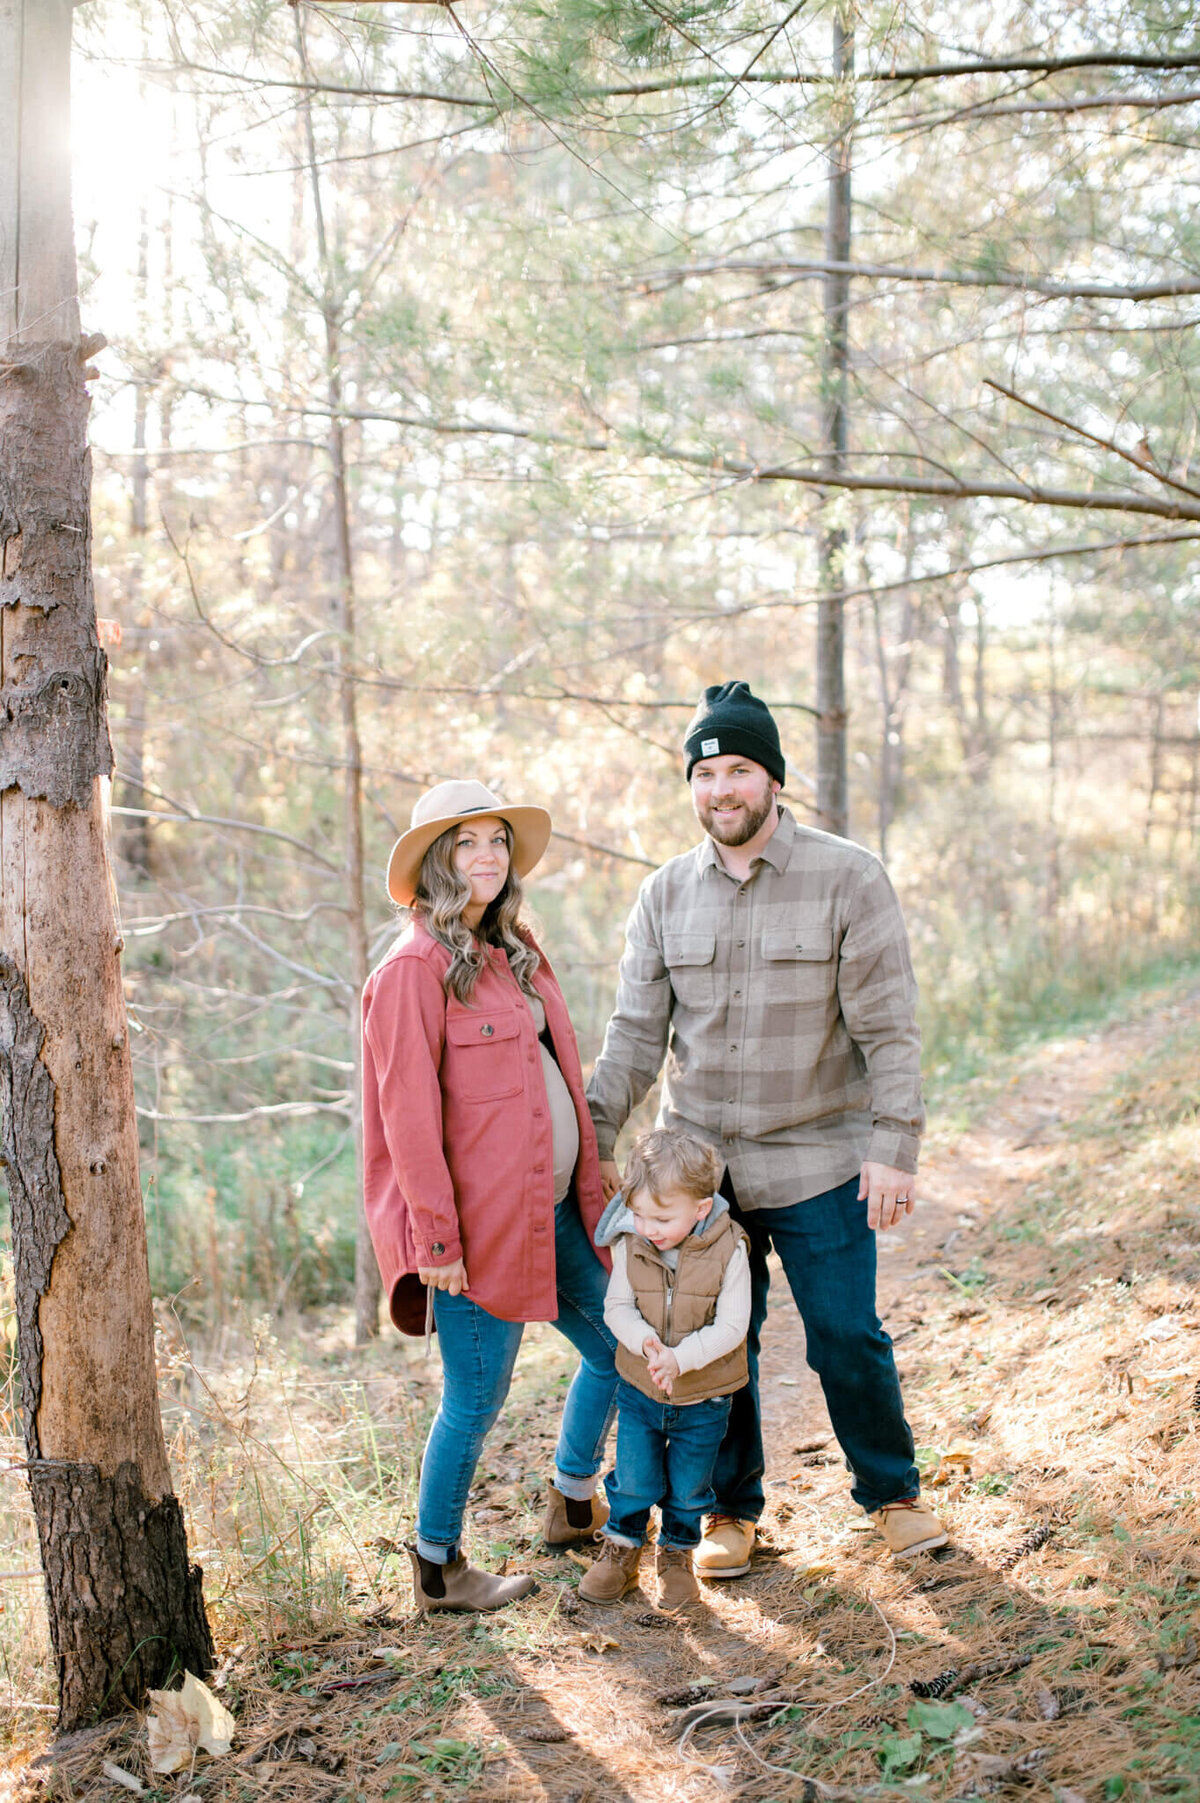 Family on a path in the forest. Light and airy family photography.